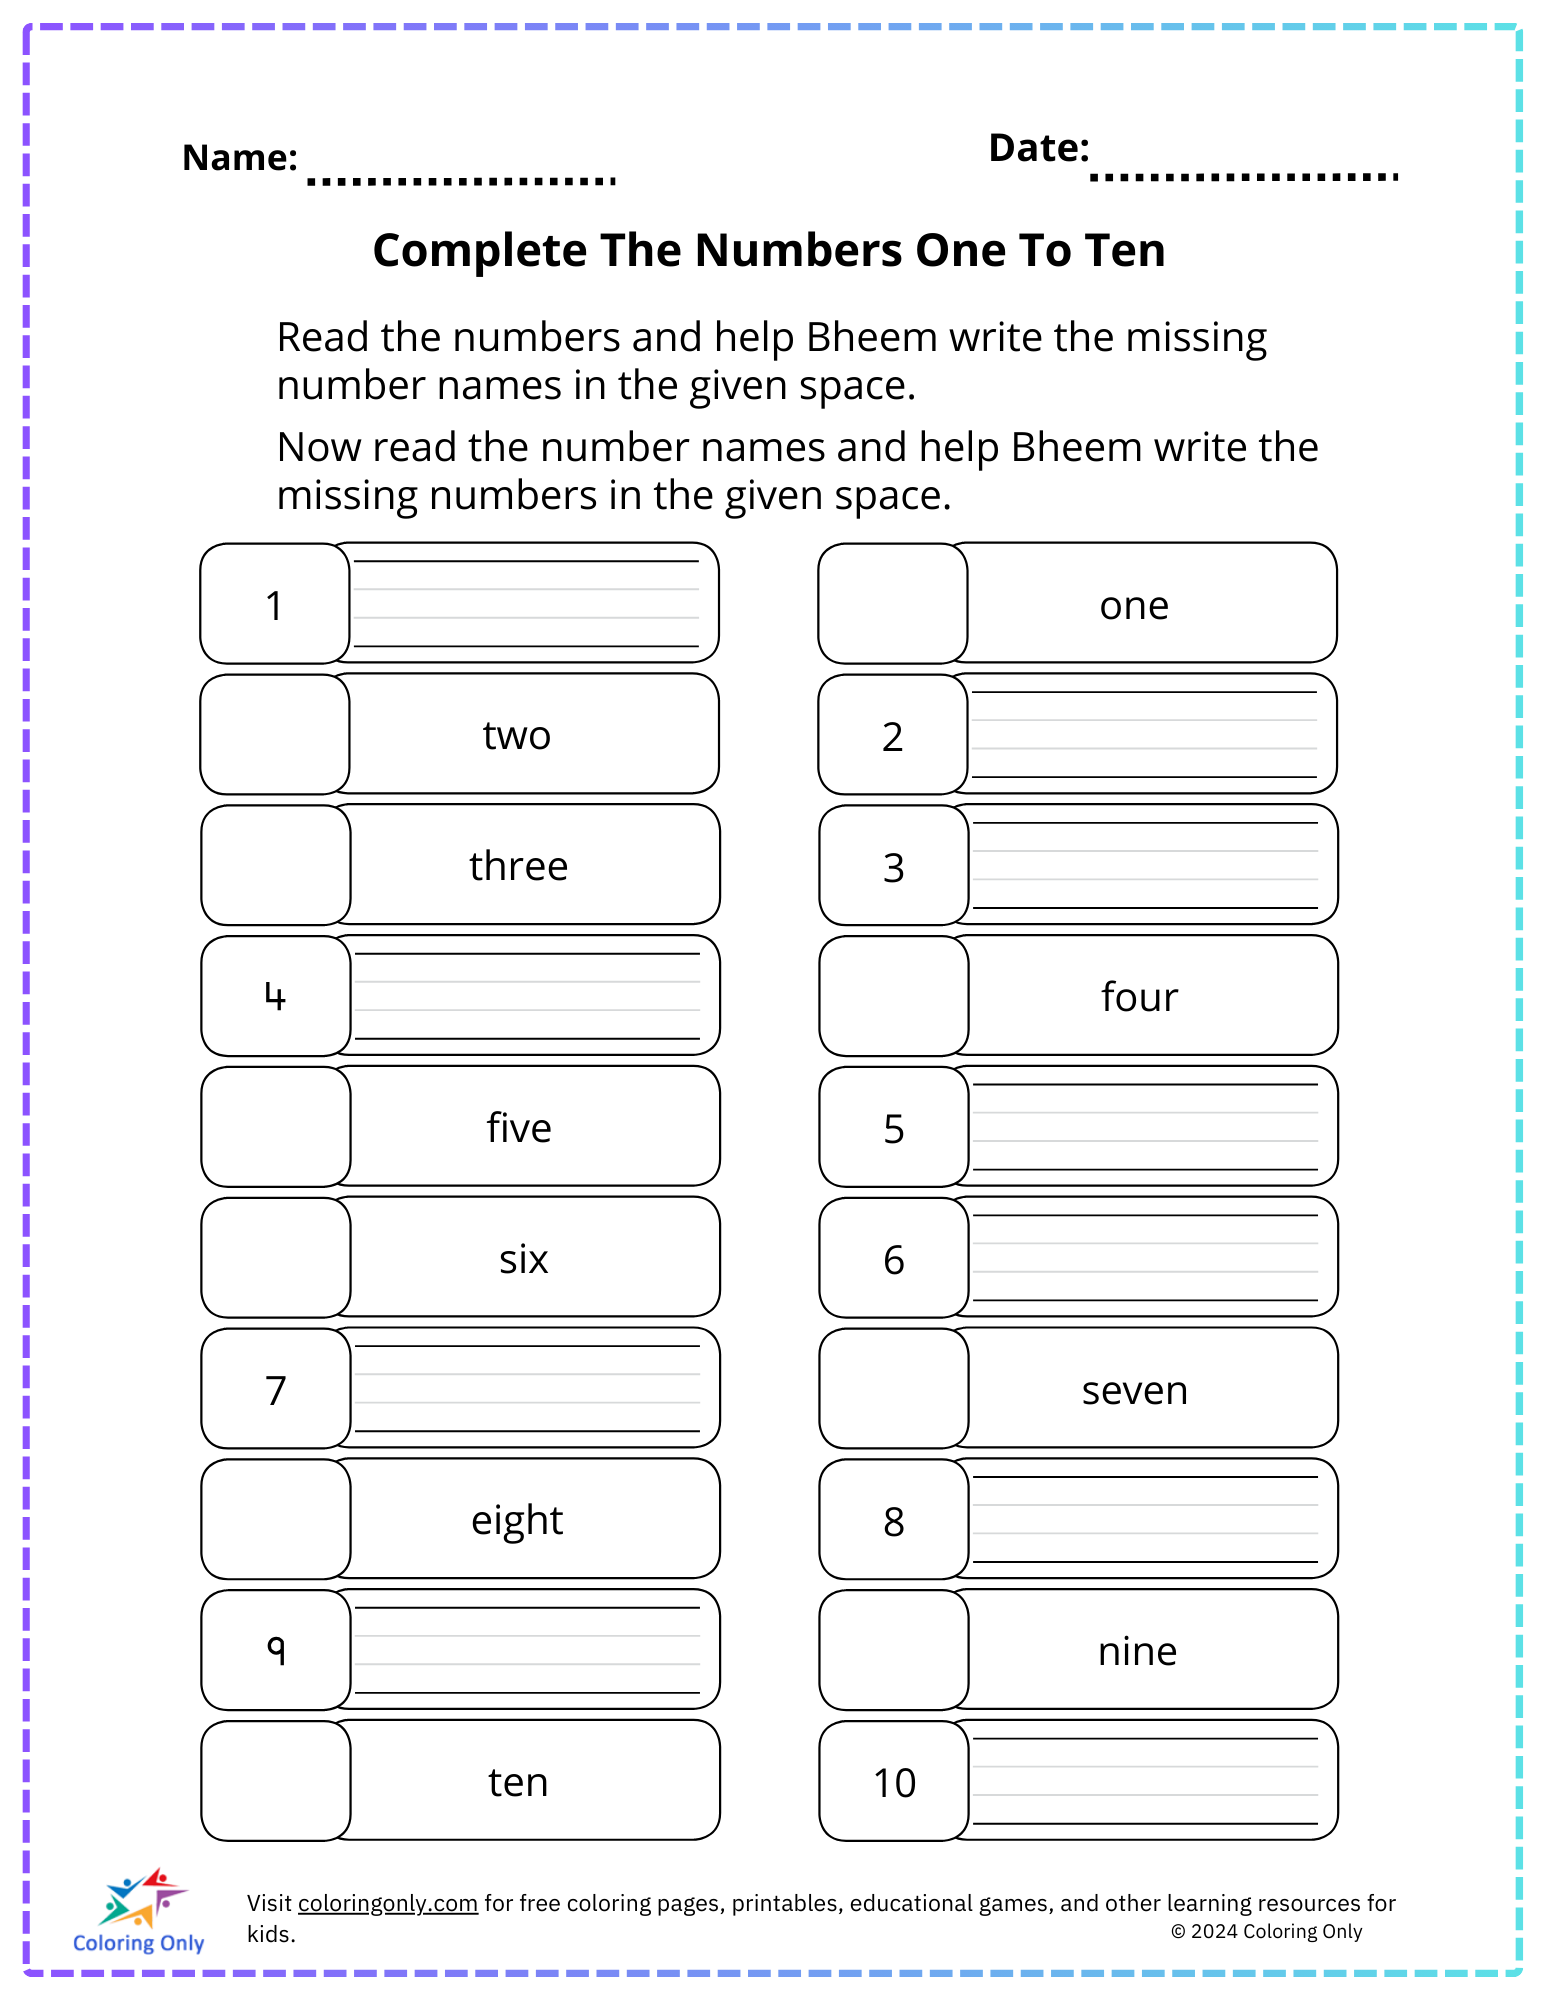 Complete The Numbers One To Ten Free Printable Worksheet